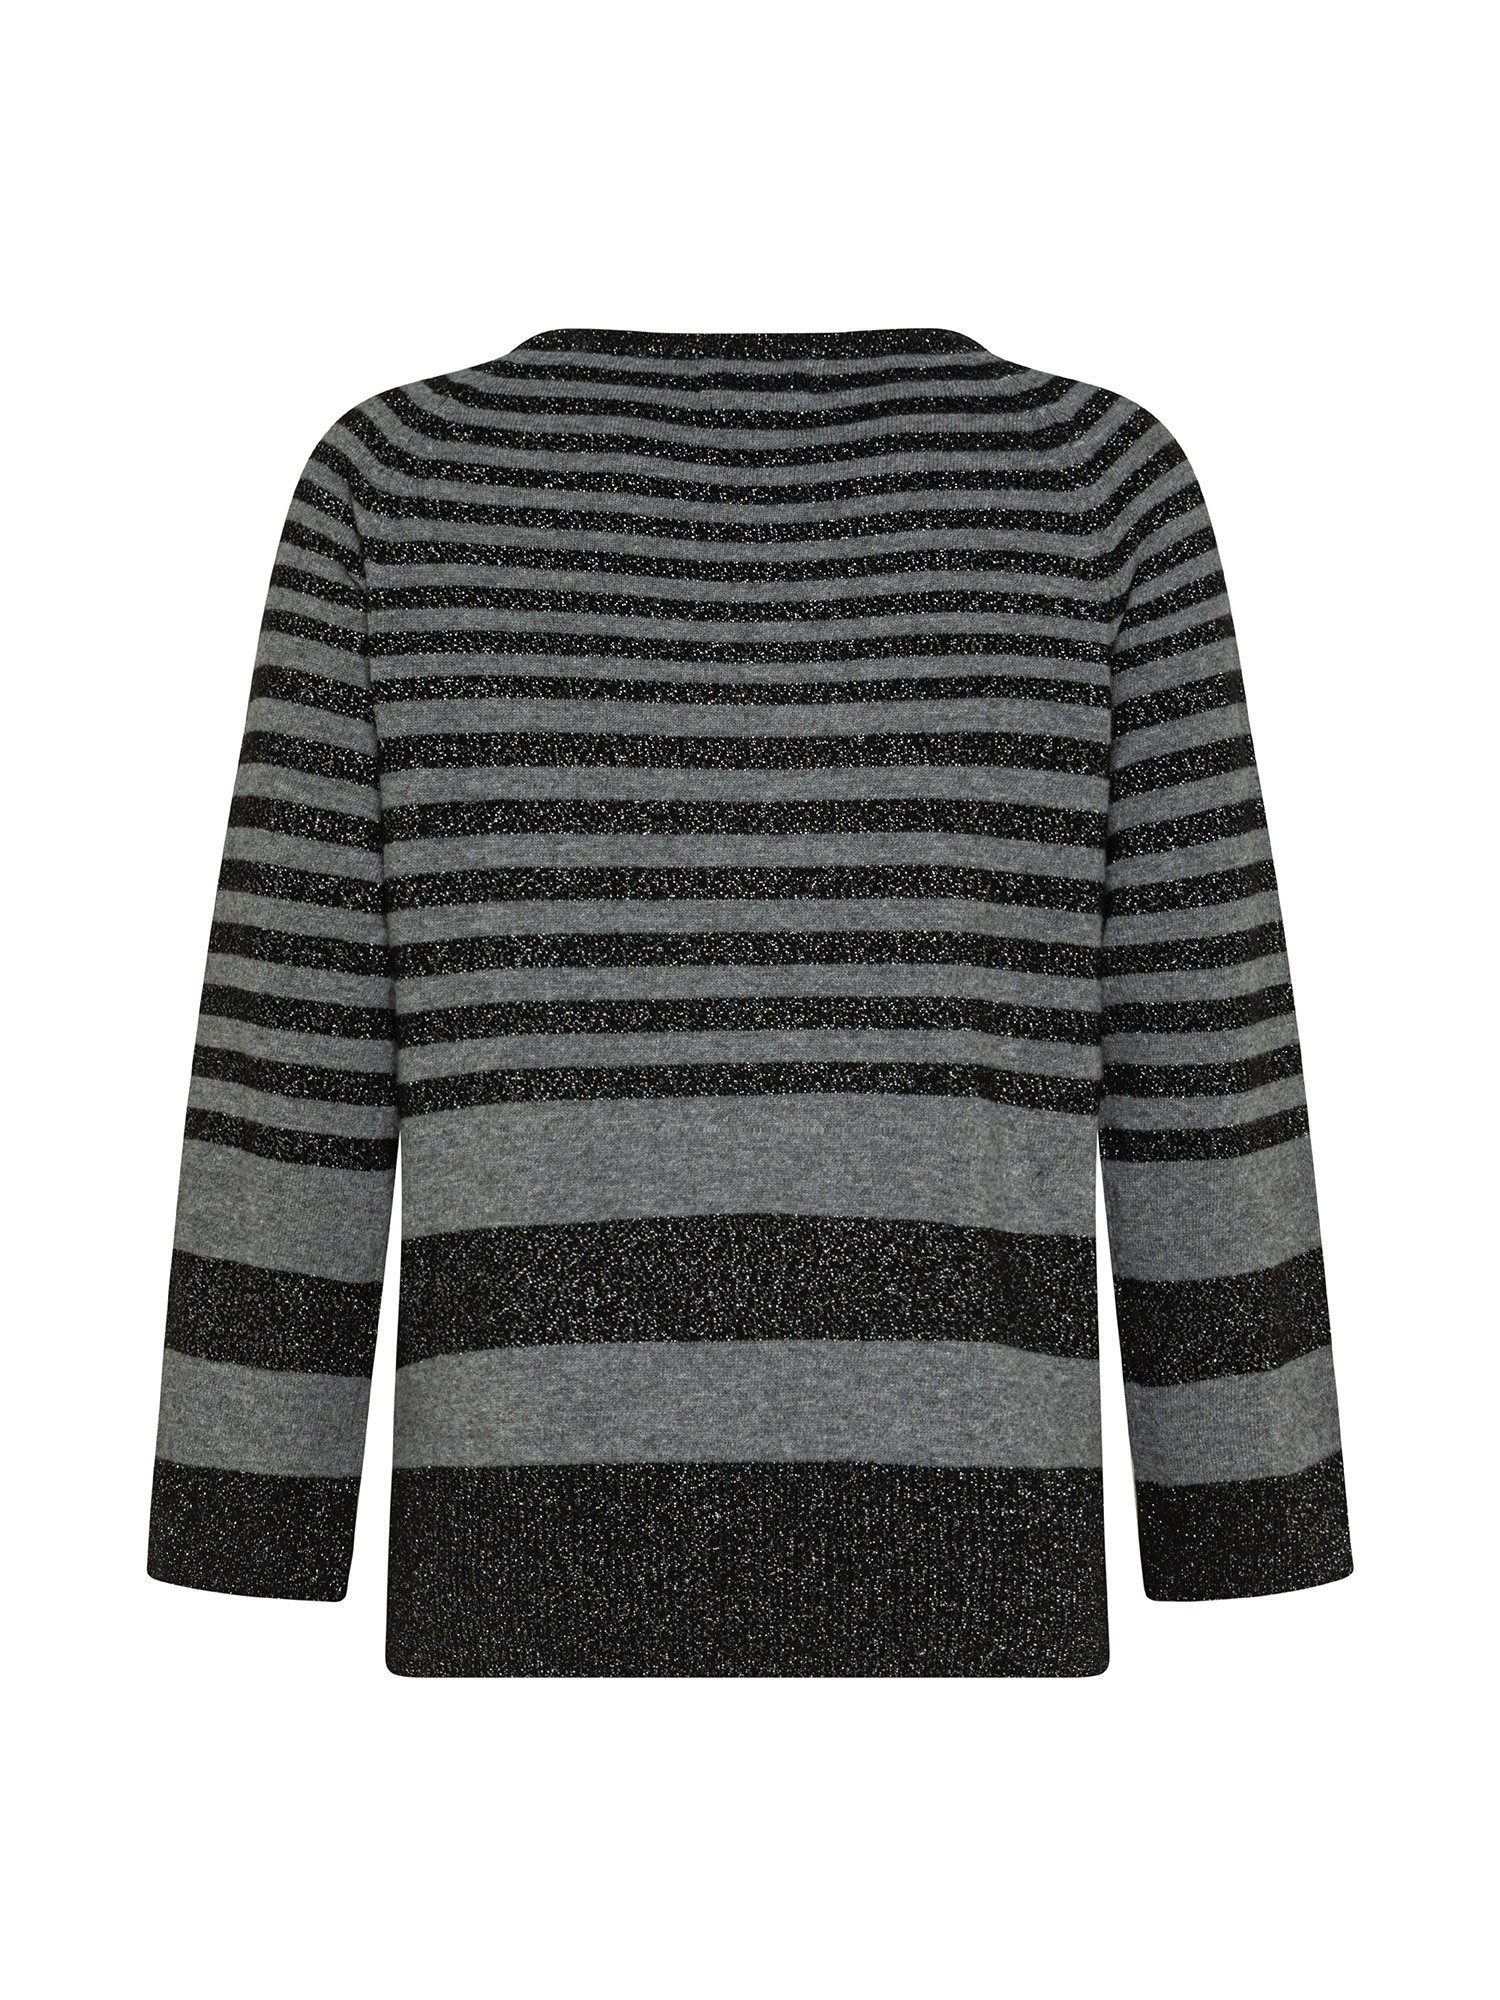 Koan - Striped sweater with slits, Black, large image number 1